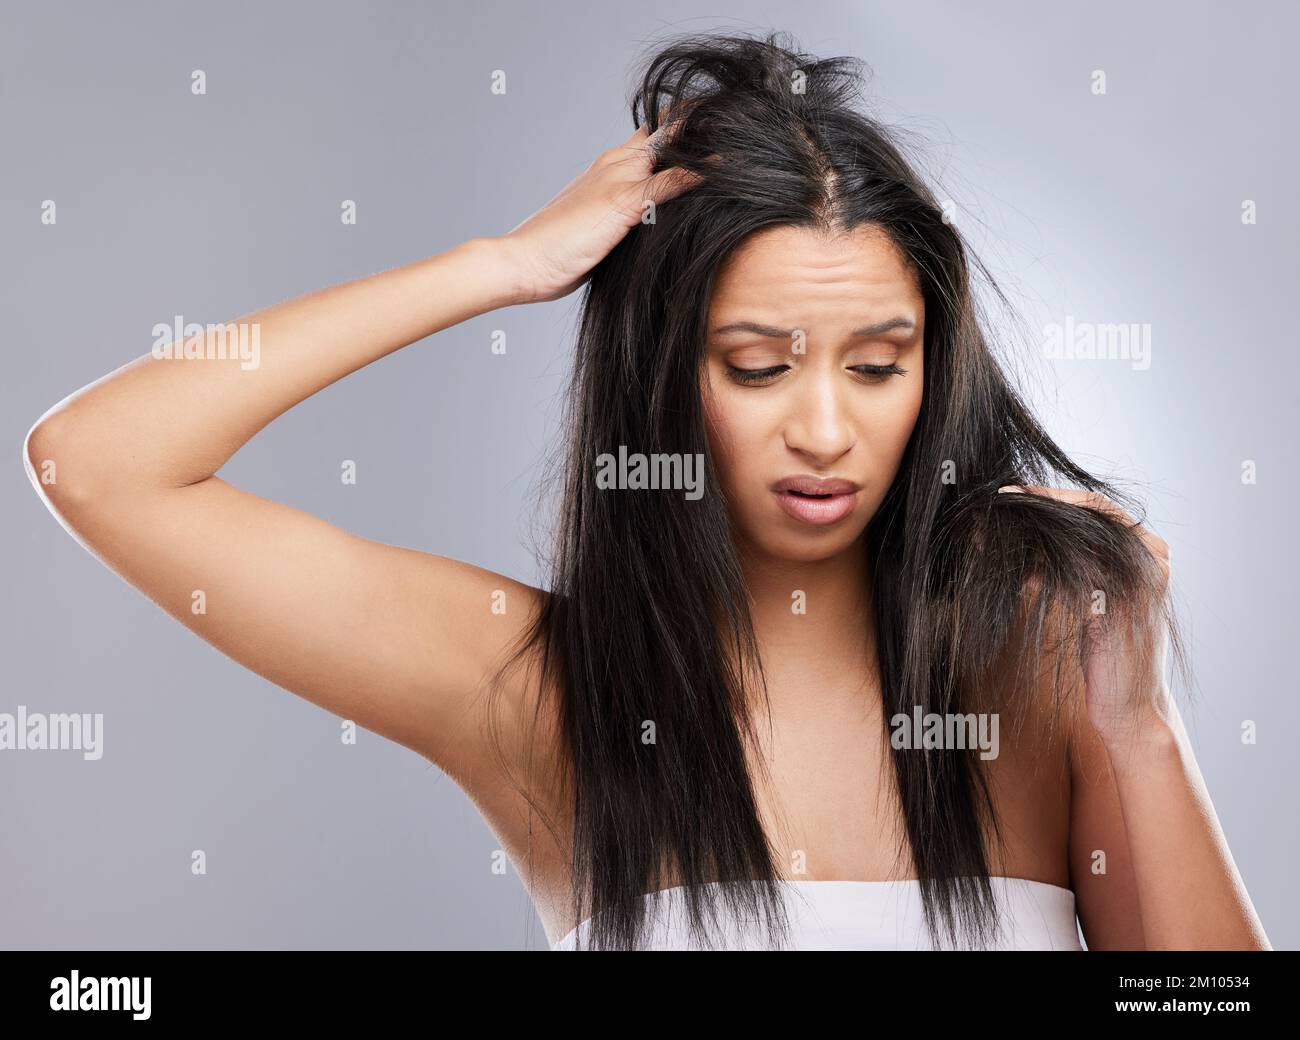 When did my hair get so dry and dull. Studio shot of a young woman with  damaged hair posing against a grey background Stock Photo - Alamy